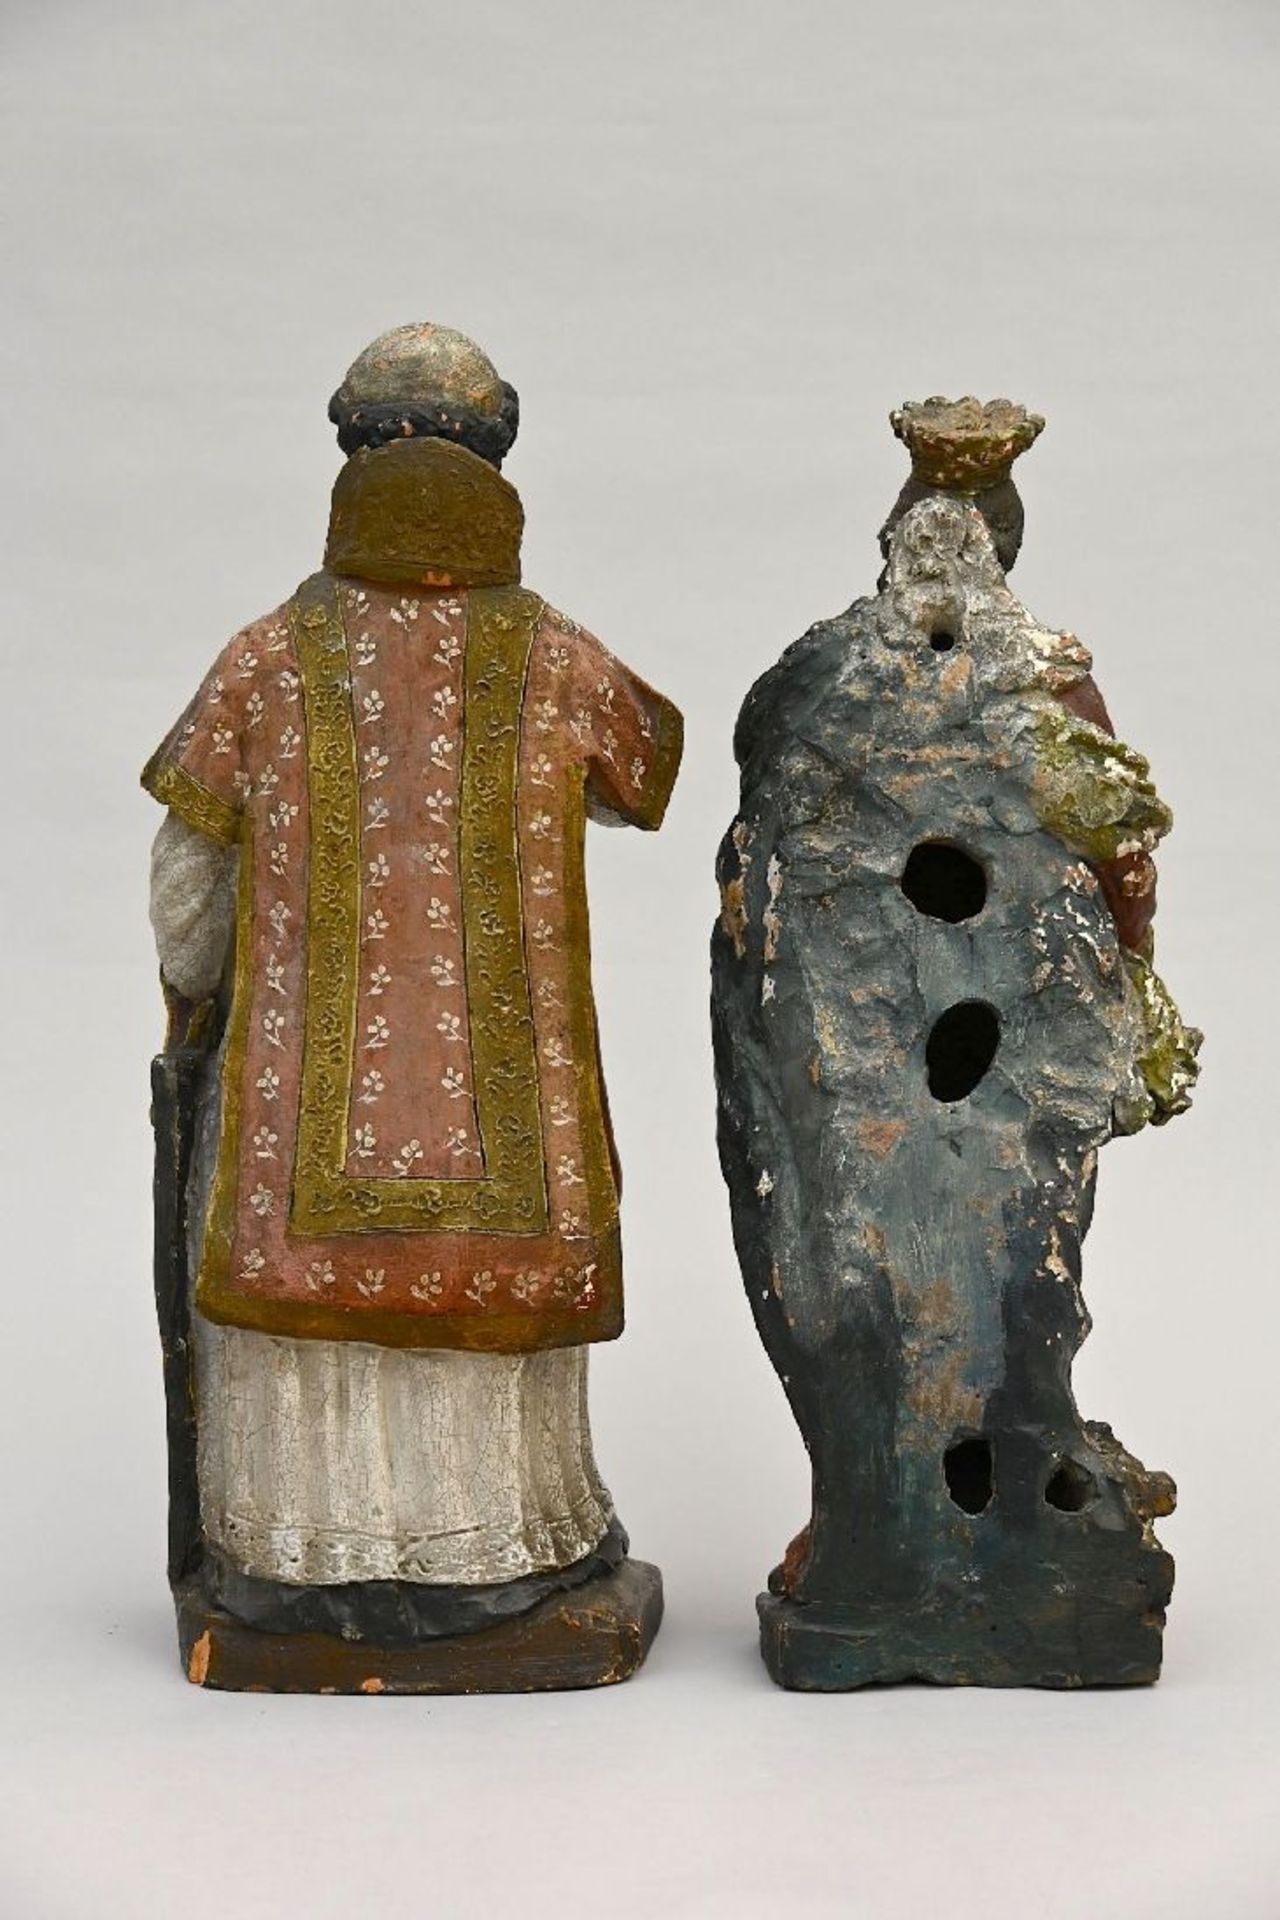 Two terracotta statues of saints, 17th - 18th century - Image 2 of 5